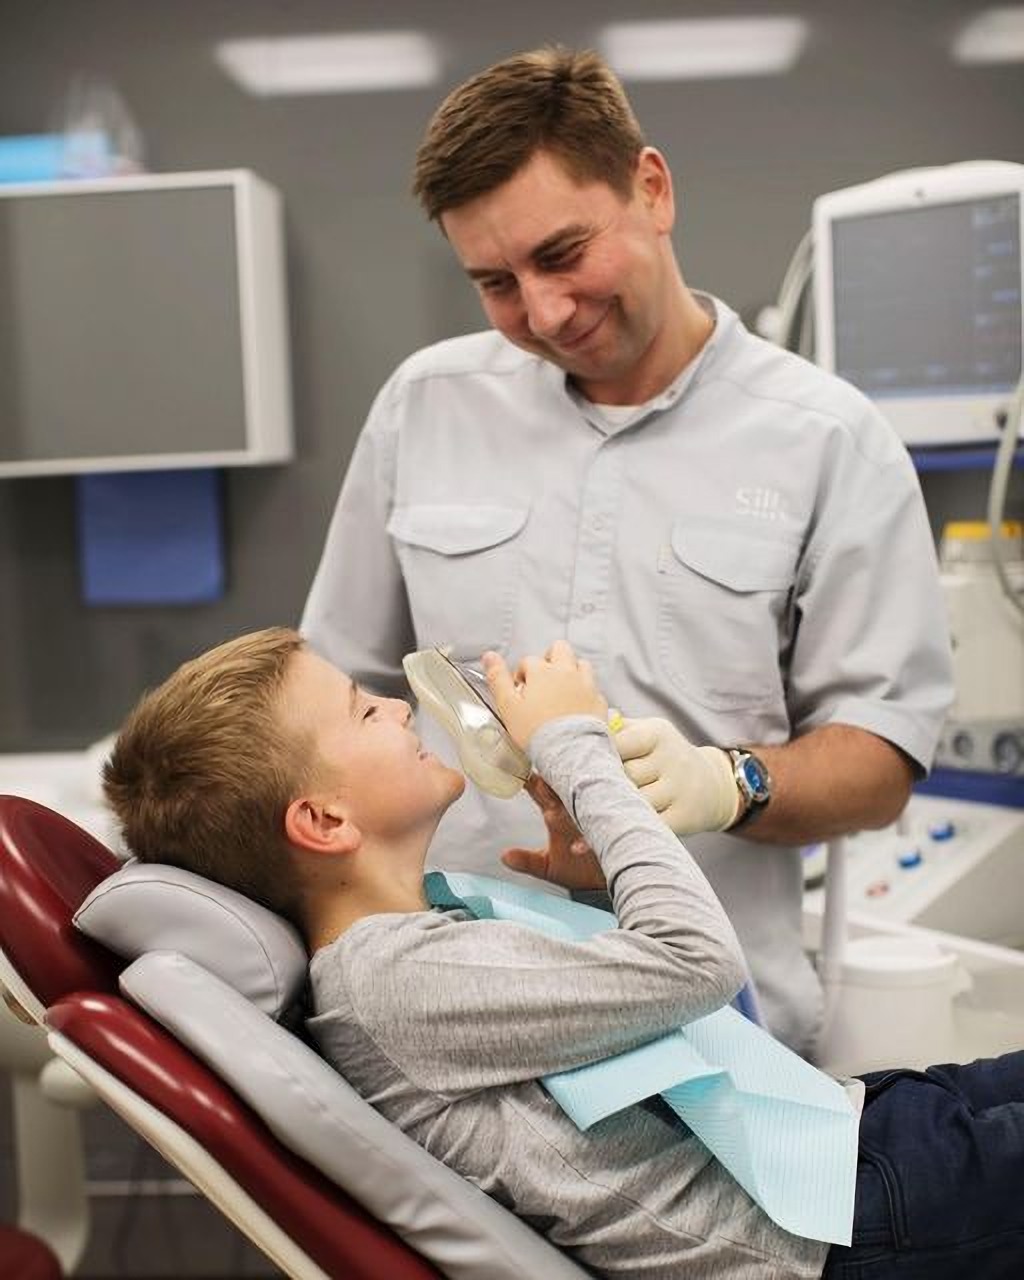 A child at the dentist's appointment at Silk Clinic